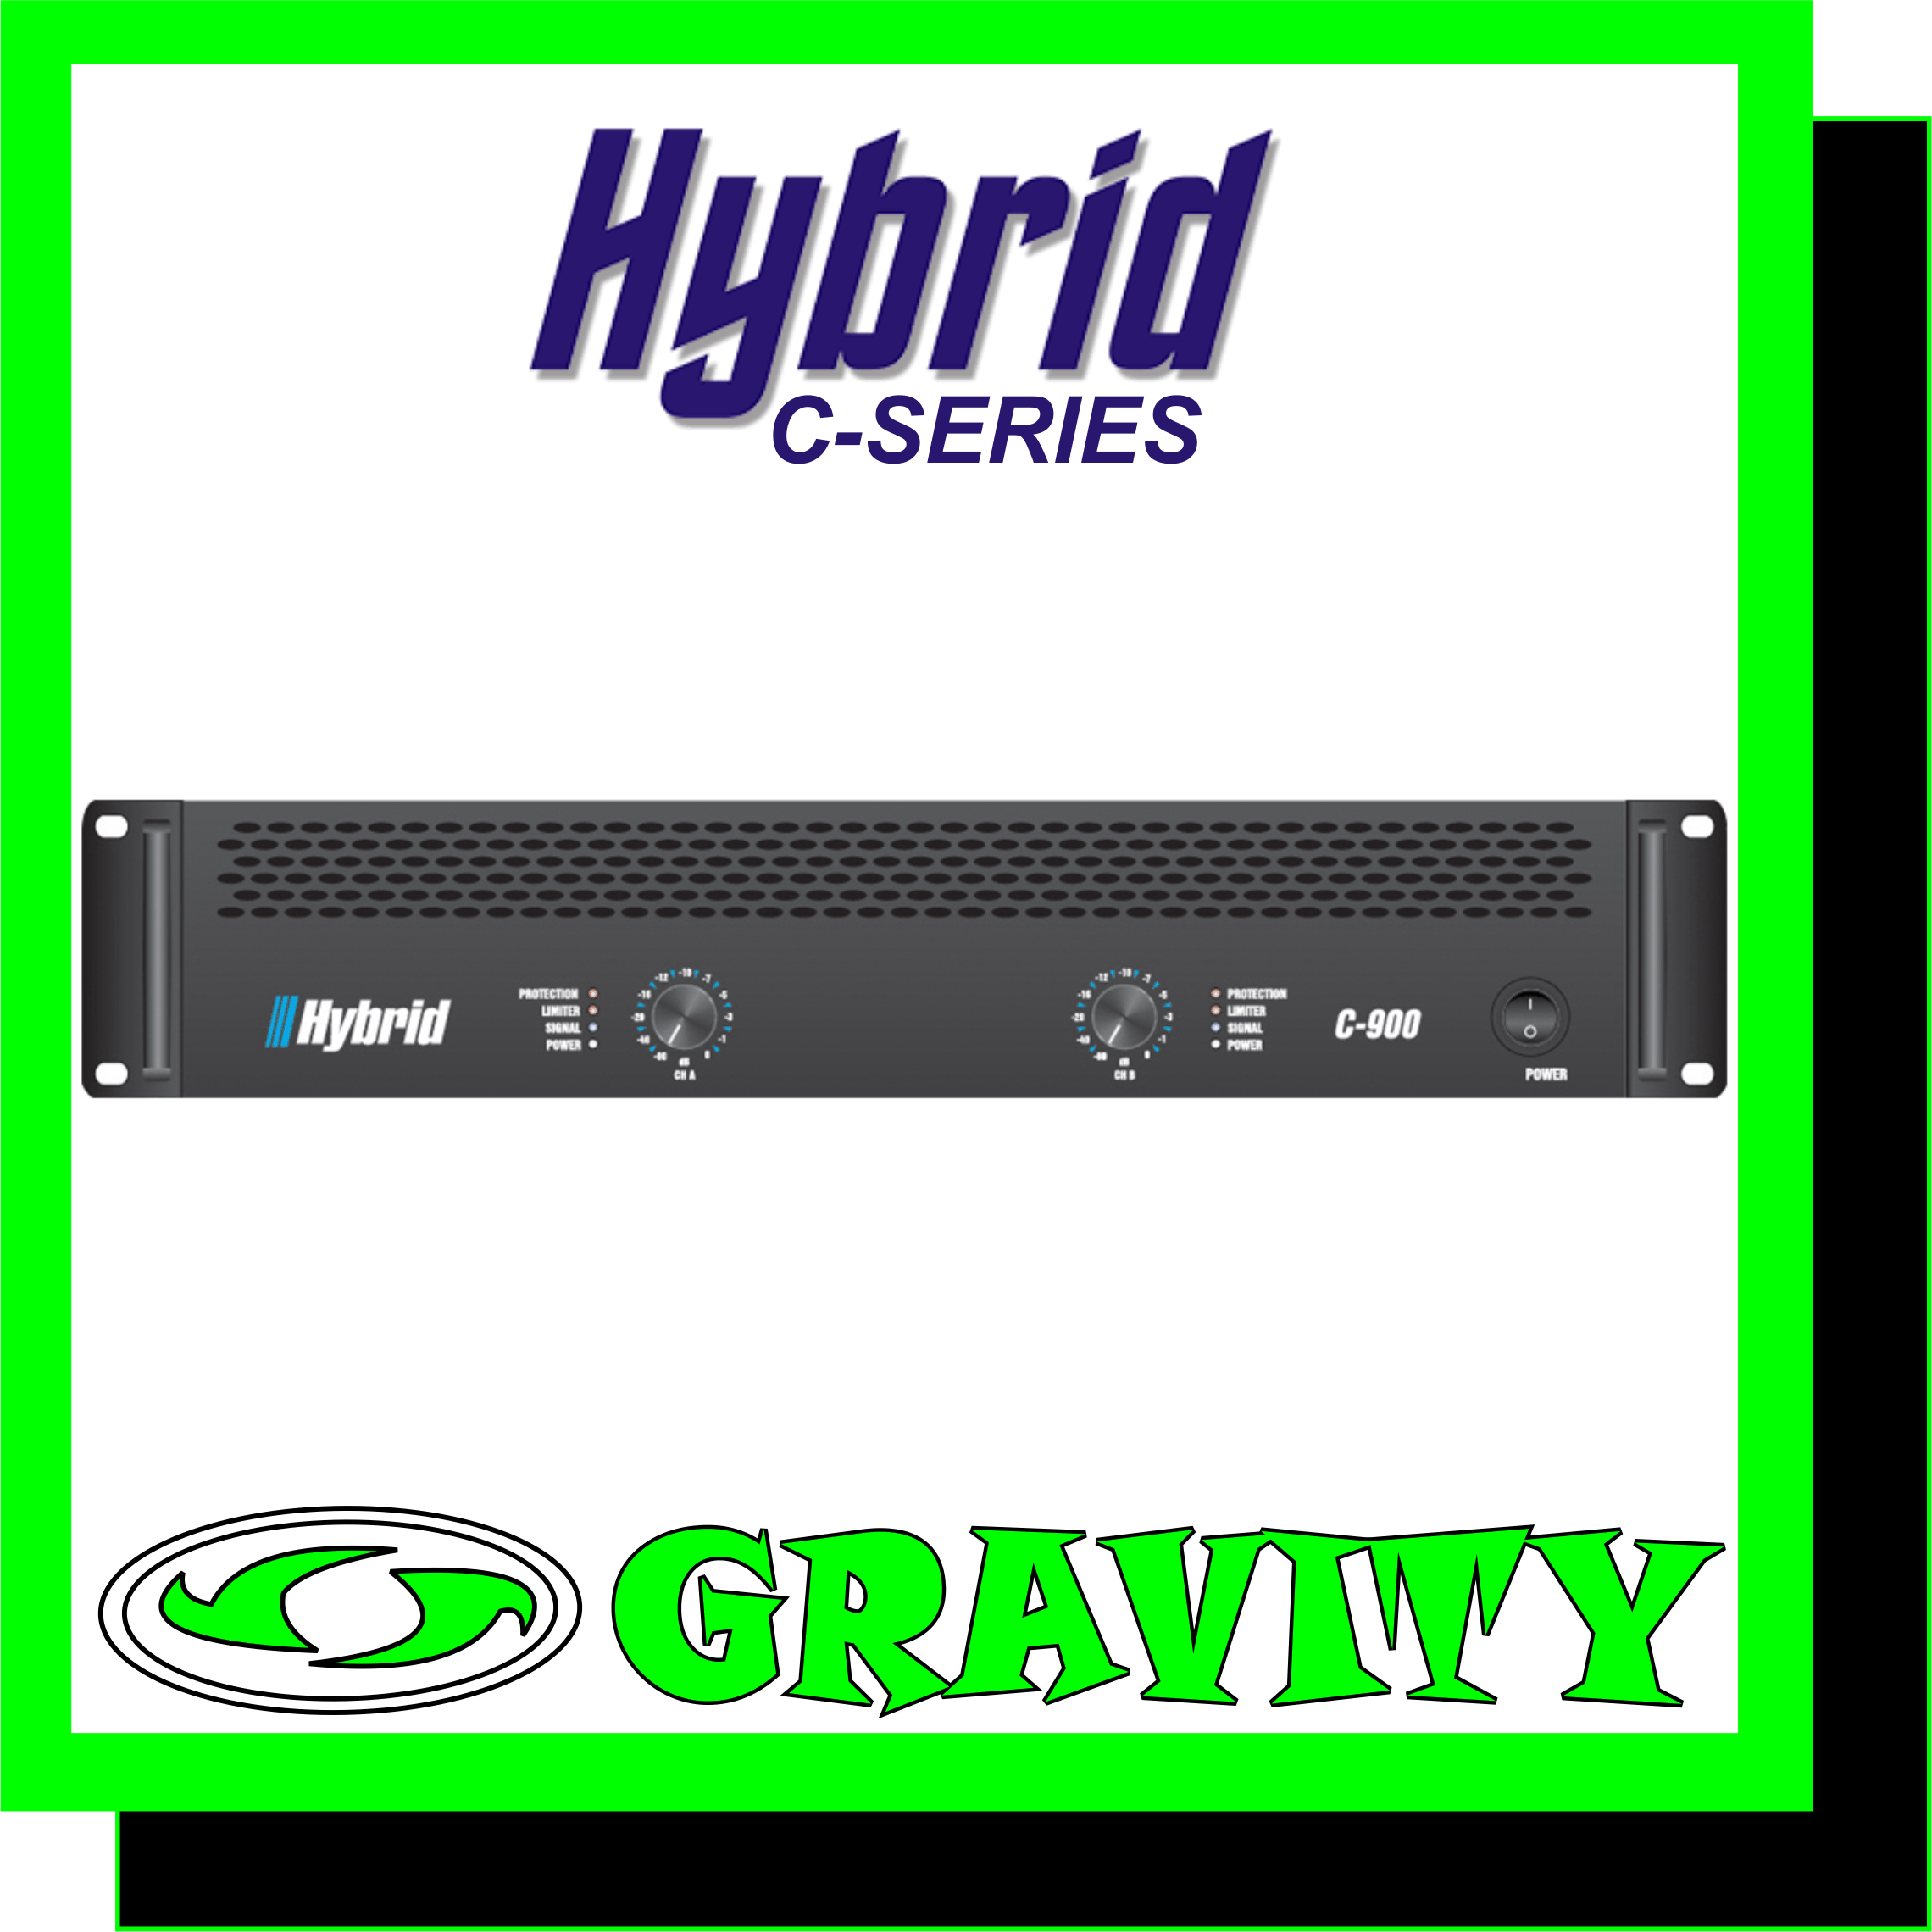 Hybrid C900MK2 2X450W with X-over  8Ohm Stereo Power . RMS/CH 290W 4Ohm Stereo Power . RMS/CH 430W 8Ohm Bridged Mono Power . RMS 860W  Frequency Response ( 1W/8O) 20Hz 20KHz +/- 3dB Protection DC Protection . Short Circuit Protection . Thermal Protection . Inrush Current Protection . Soft Start Portection . Input & Overload Protection THD+N (20Hz-20KHz) <0.1% Damping Factor (1KHz @ 8O) >300 Hum & Noise(A weighted . -80dBW) 95dB Input Impedance (Balanced / Unbalanced) 20K Ohm / 10K Ohm Crosstalk (20Hz-20KHz Rated Power 8O) >60dB Cooling 2 x Fans . Dual speed . Front to Rear Airflow  Input Connectors Jack/Female XLR Neutrik Combo + Male XLR Neutrik Output Connectors 3x Neutrik Speakon Dimensions (WxHxD) mm 483 x 88 x 430 Weight Kg 16